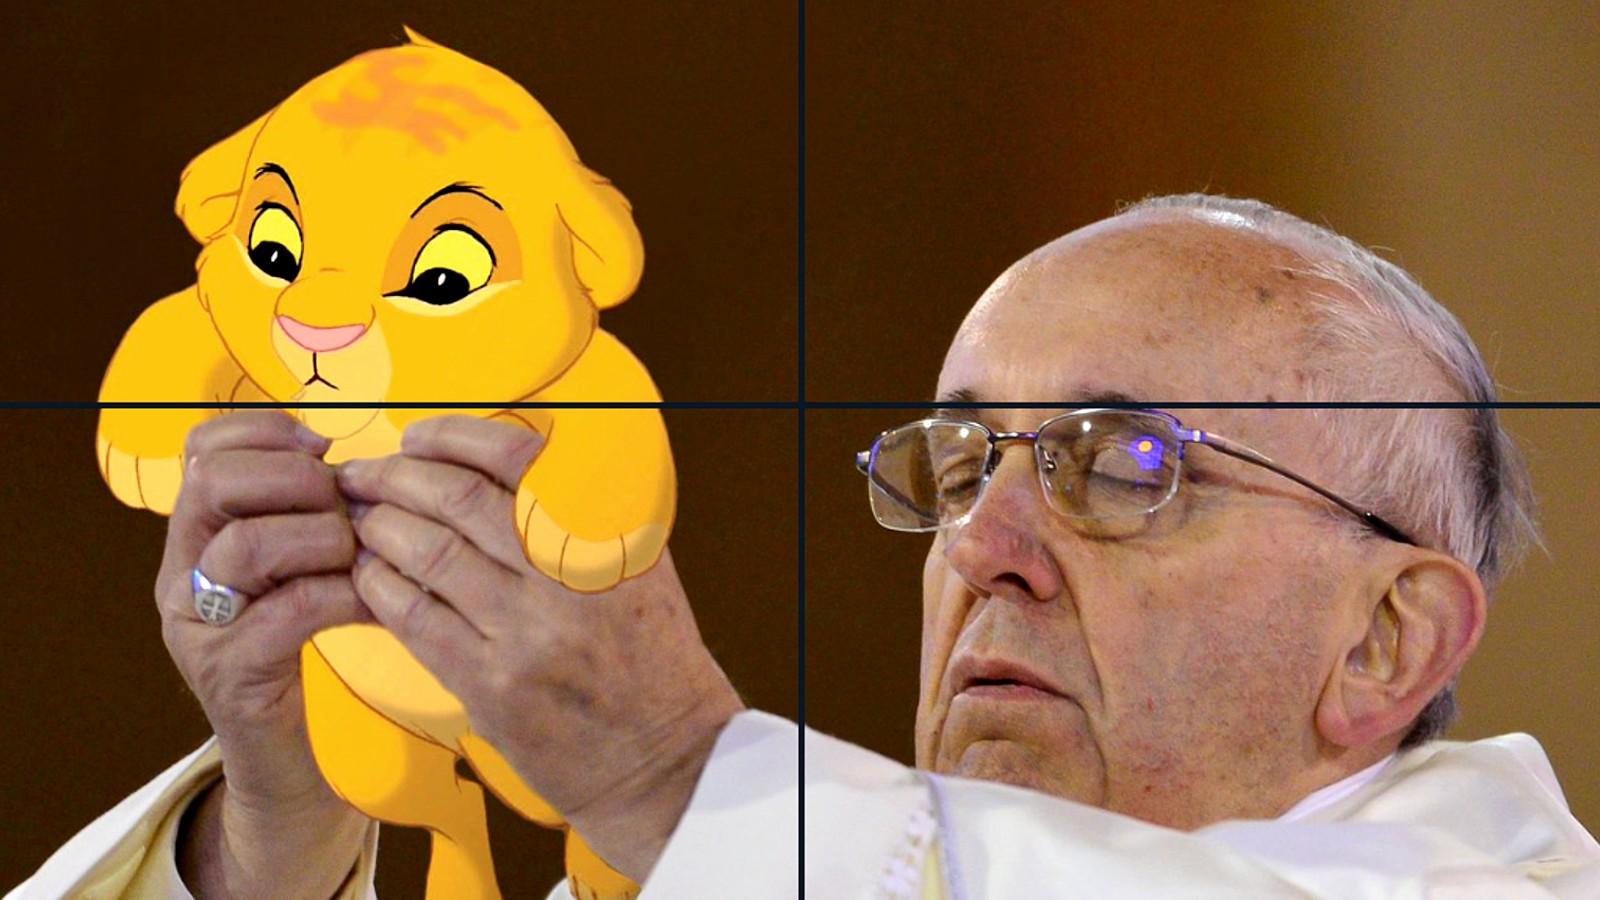 The Pope holds Simba from The Lion King